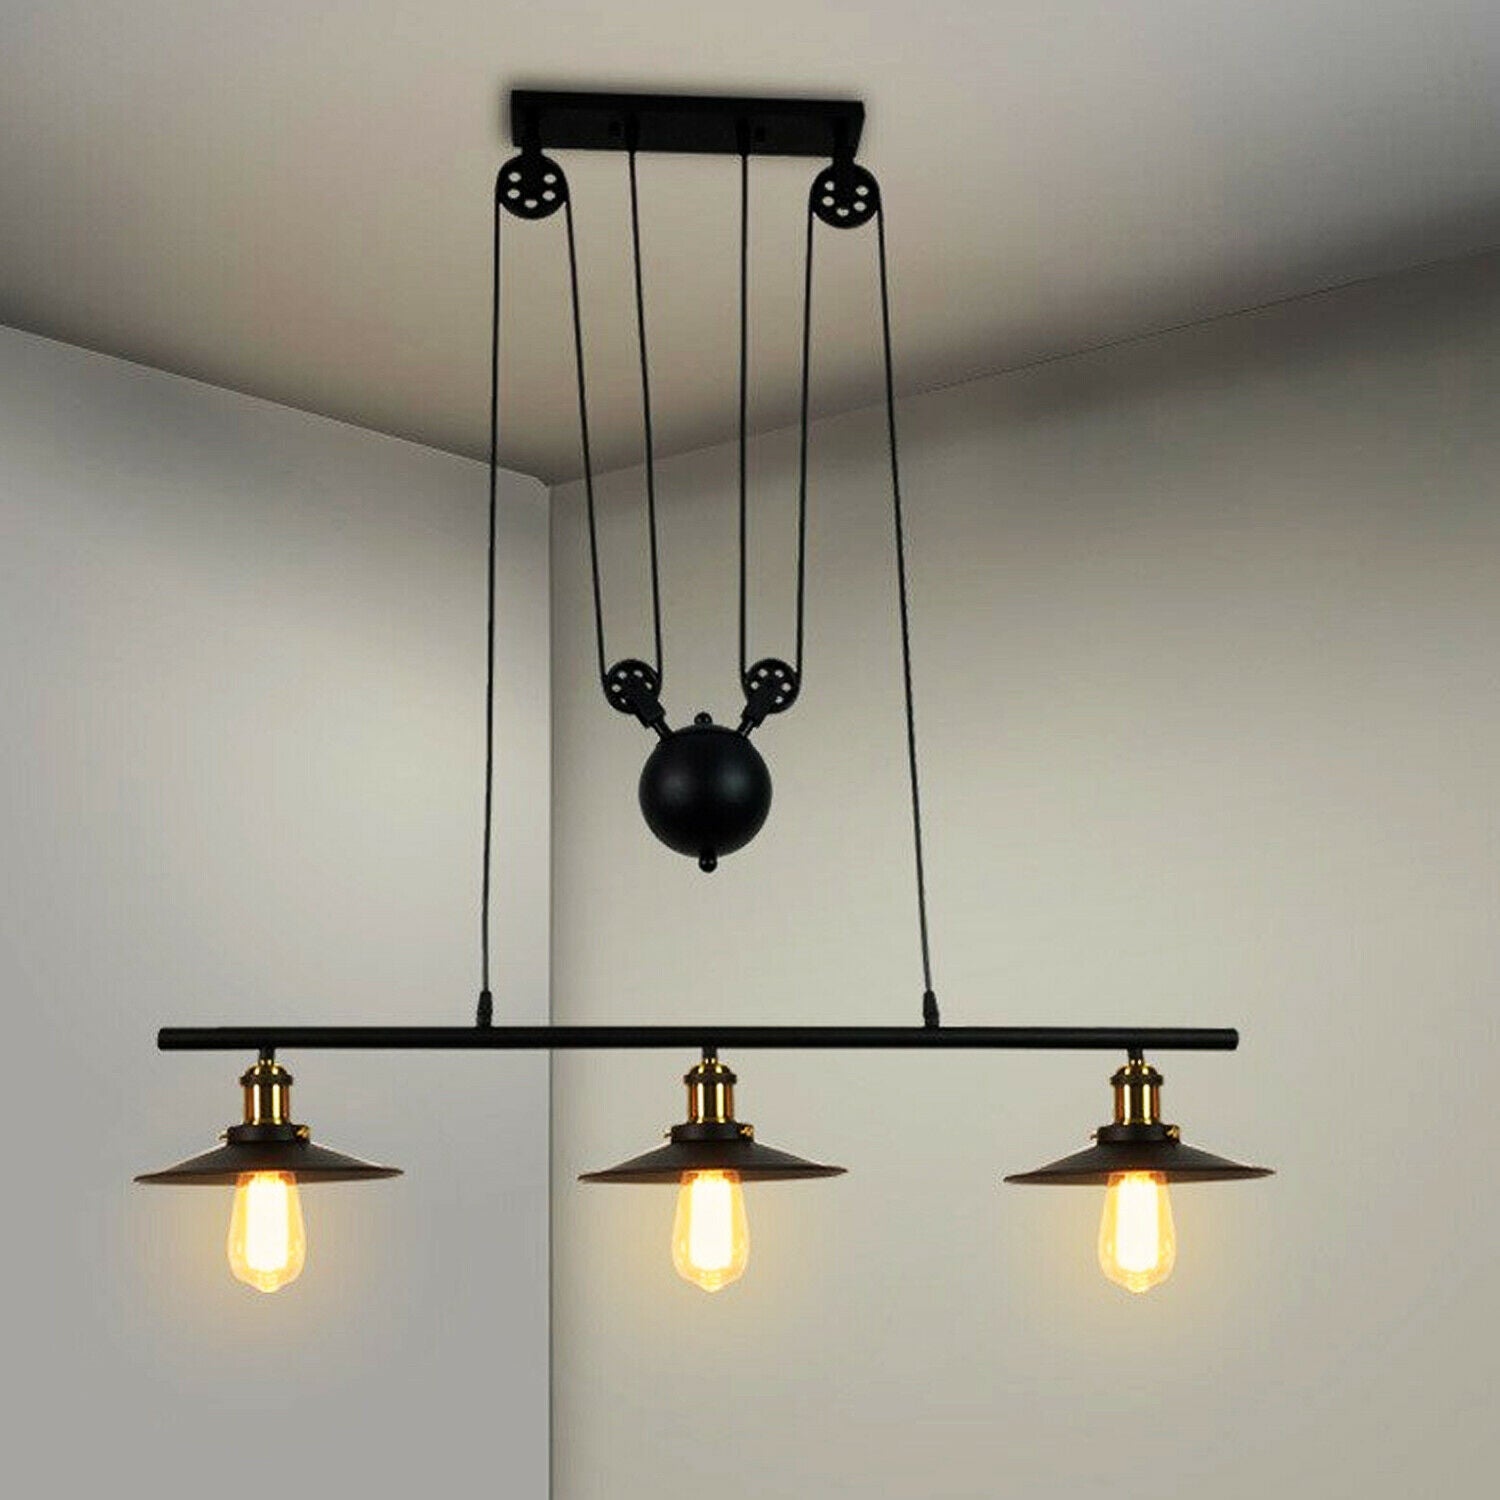 E27 Vintage Pulley Pendant Pipe Light